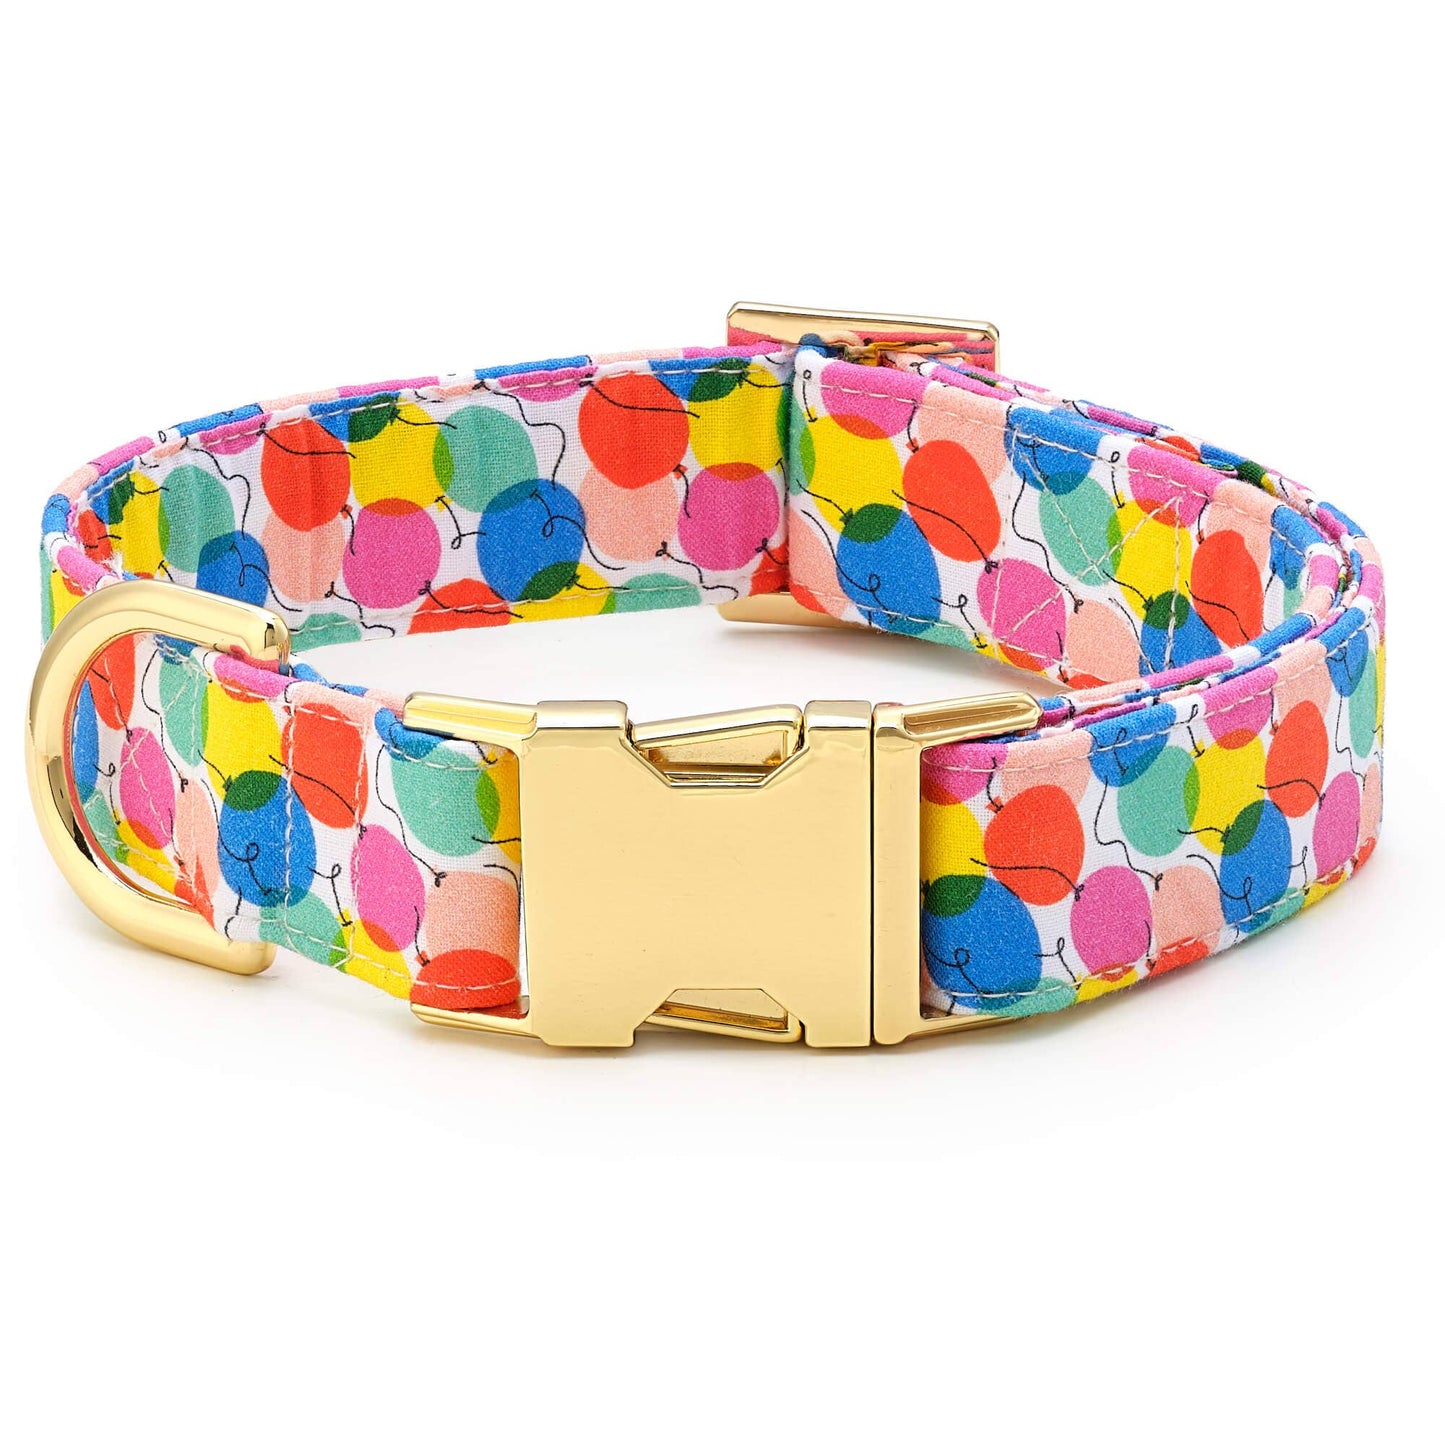 Pup, Pup, and Away Birthday Dog Collar: XS/ Gold